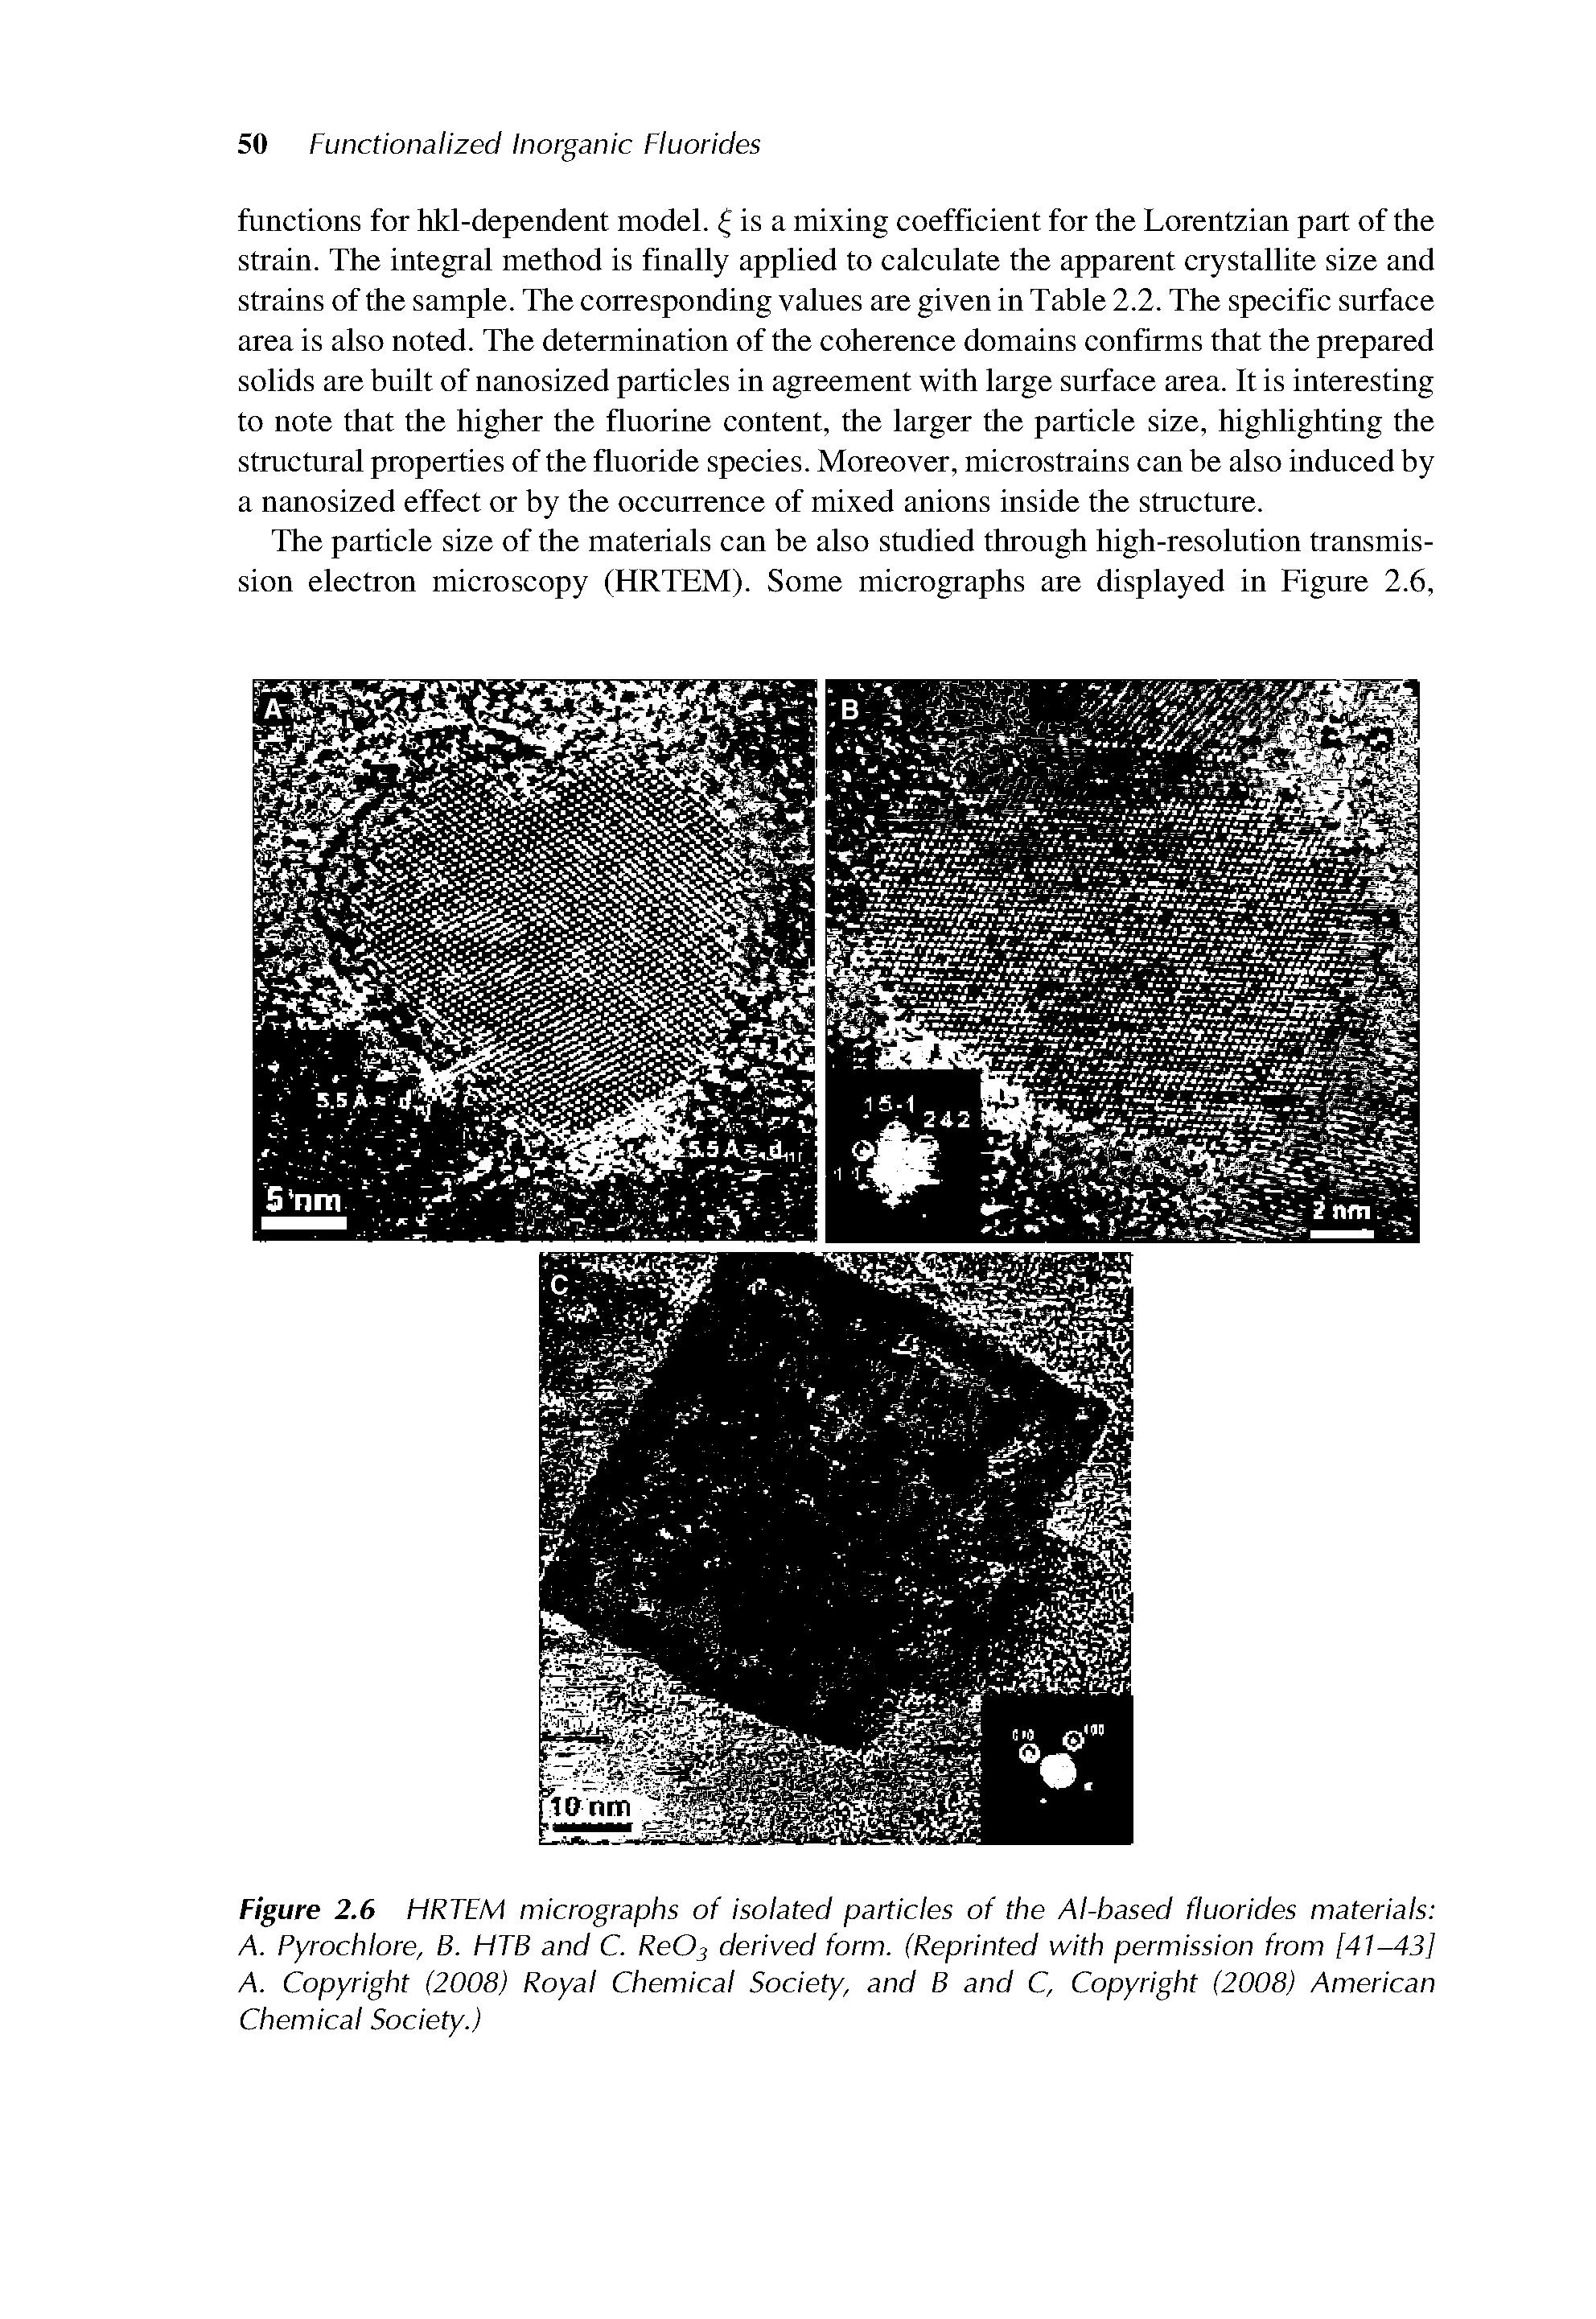 Figure 2.6 HRTEM micrographs of isolated particles of the Al-based fluorides materials A. Pyrochlore, B. HTB and C. ReOj derived form. (Reprinted with permission from [41-43] A. Copyright (2008) Royal Chemical Society, and B and C, Copyright (2008) American Chemical Society.)...